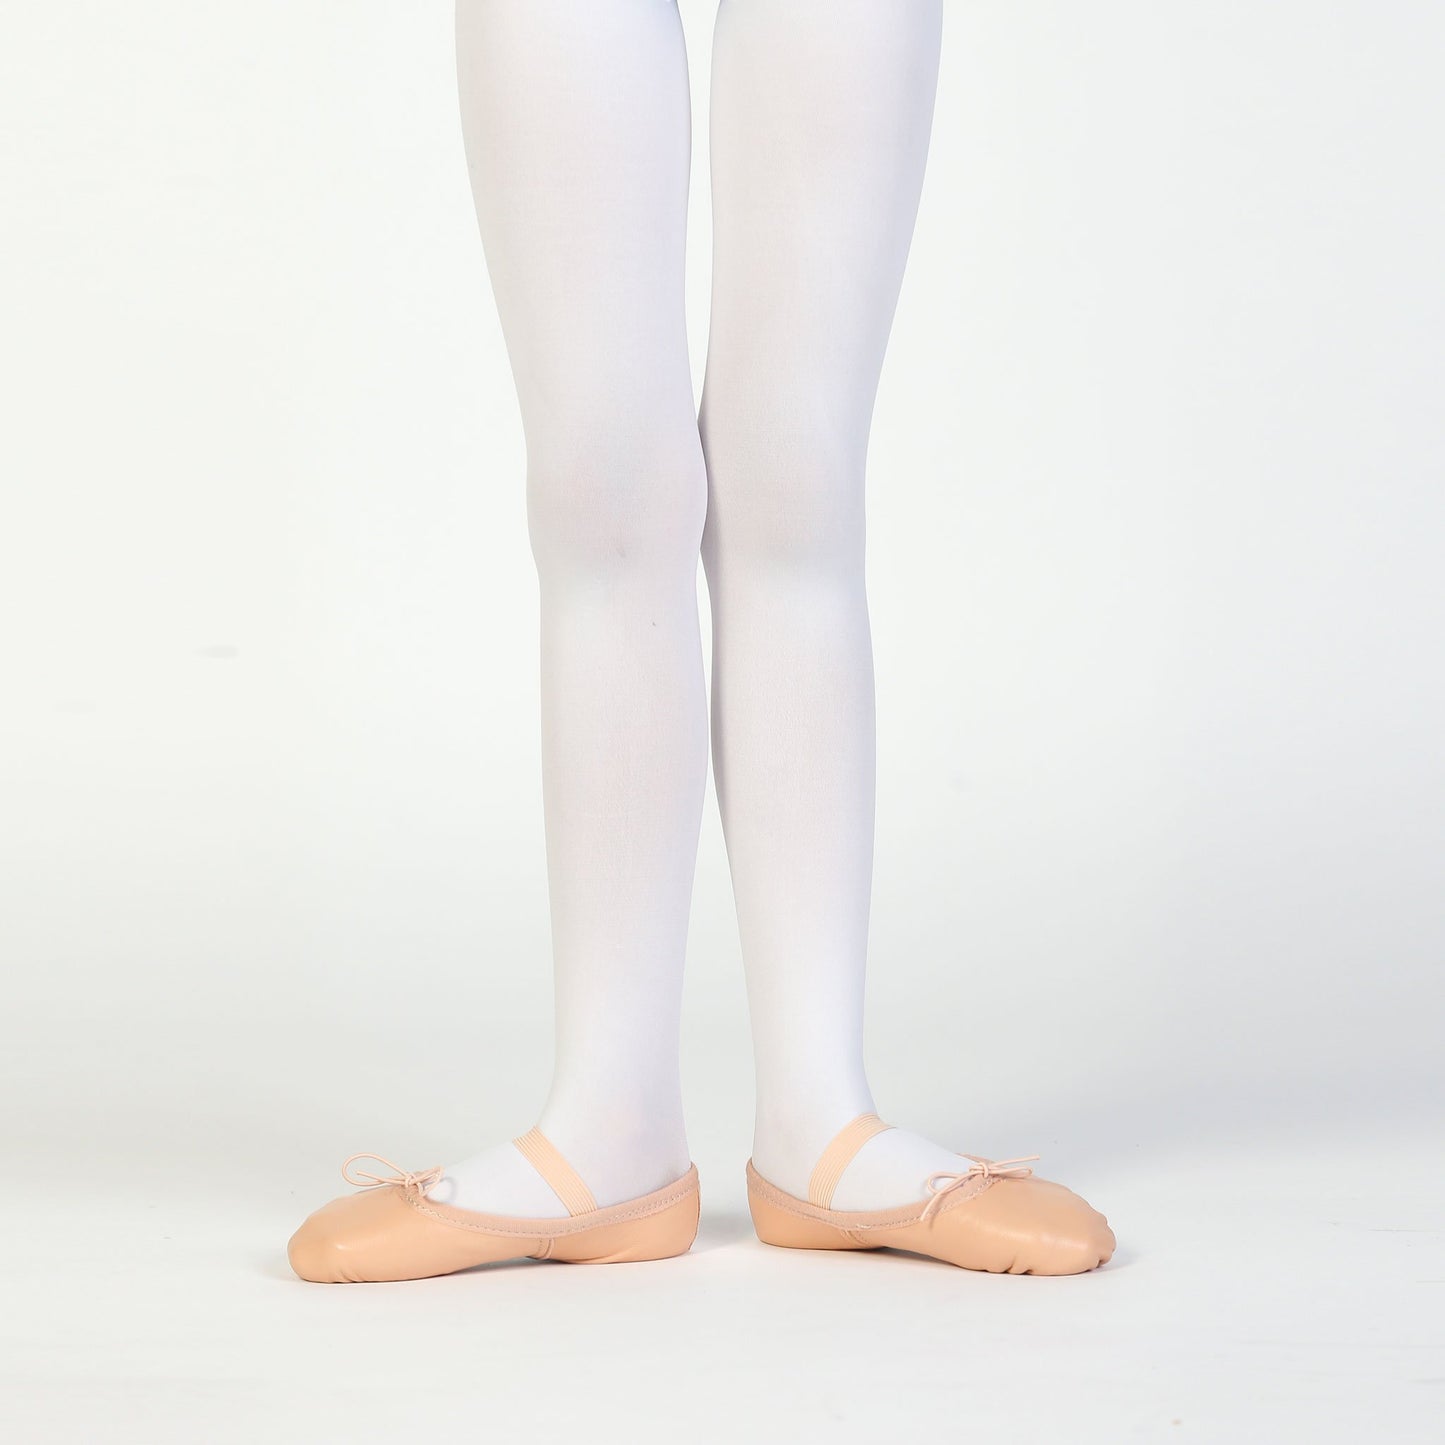 SOFT LEATHER BALLET SHOES - Body Core